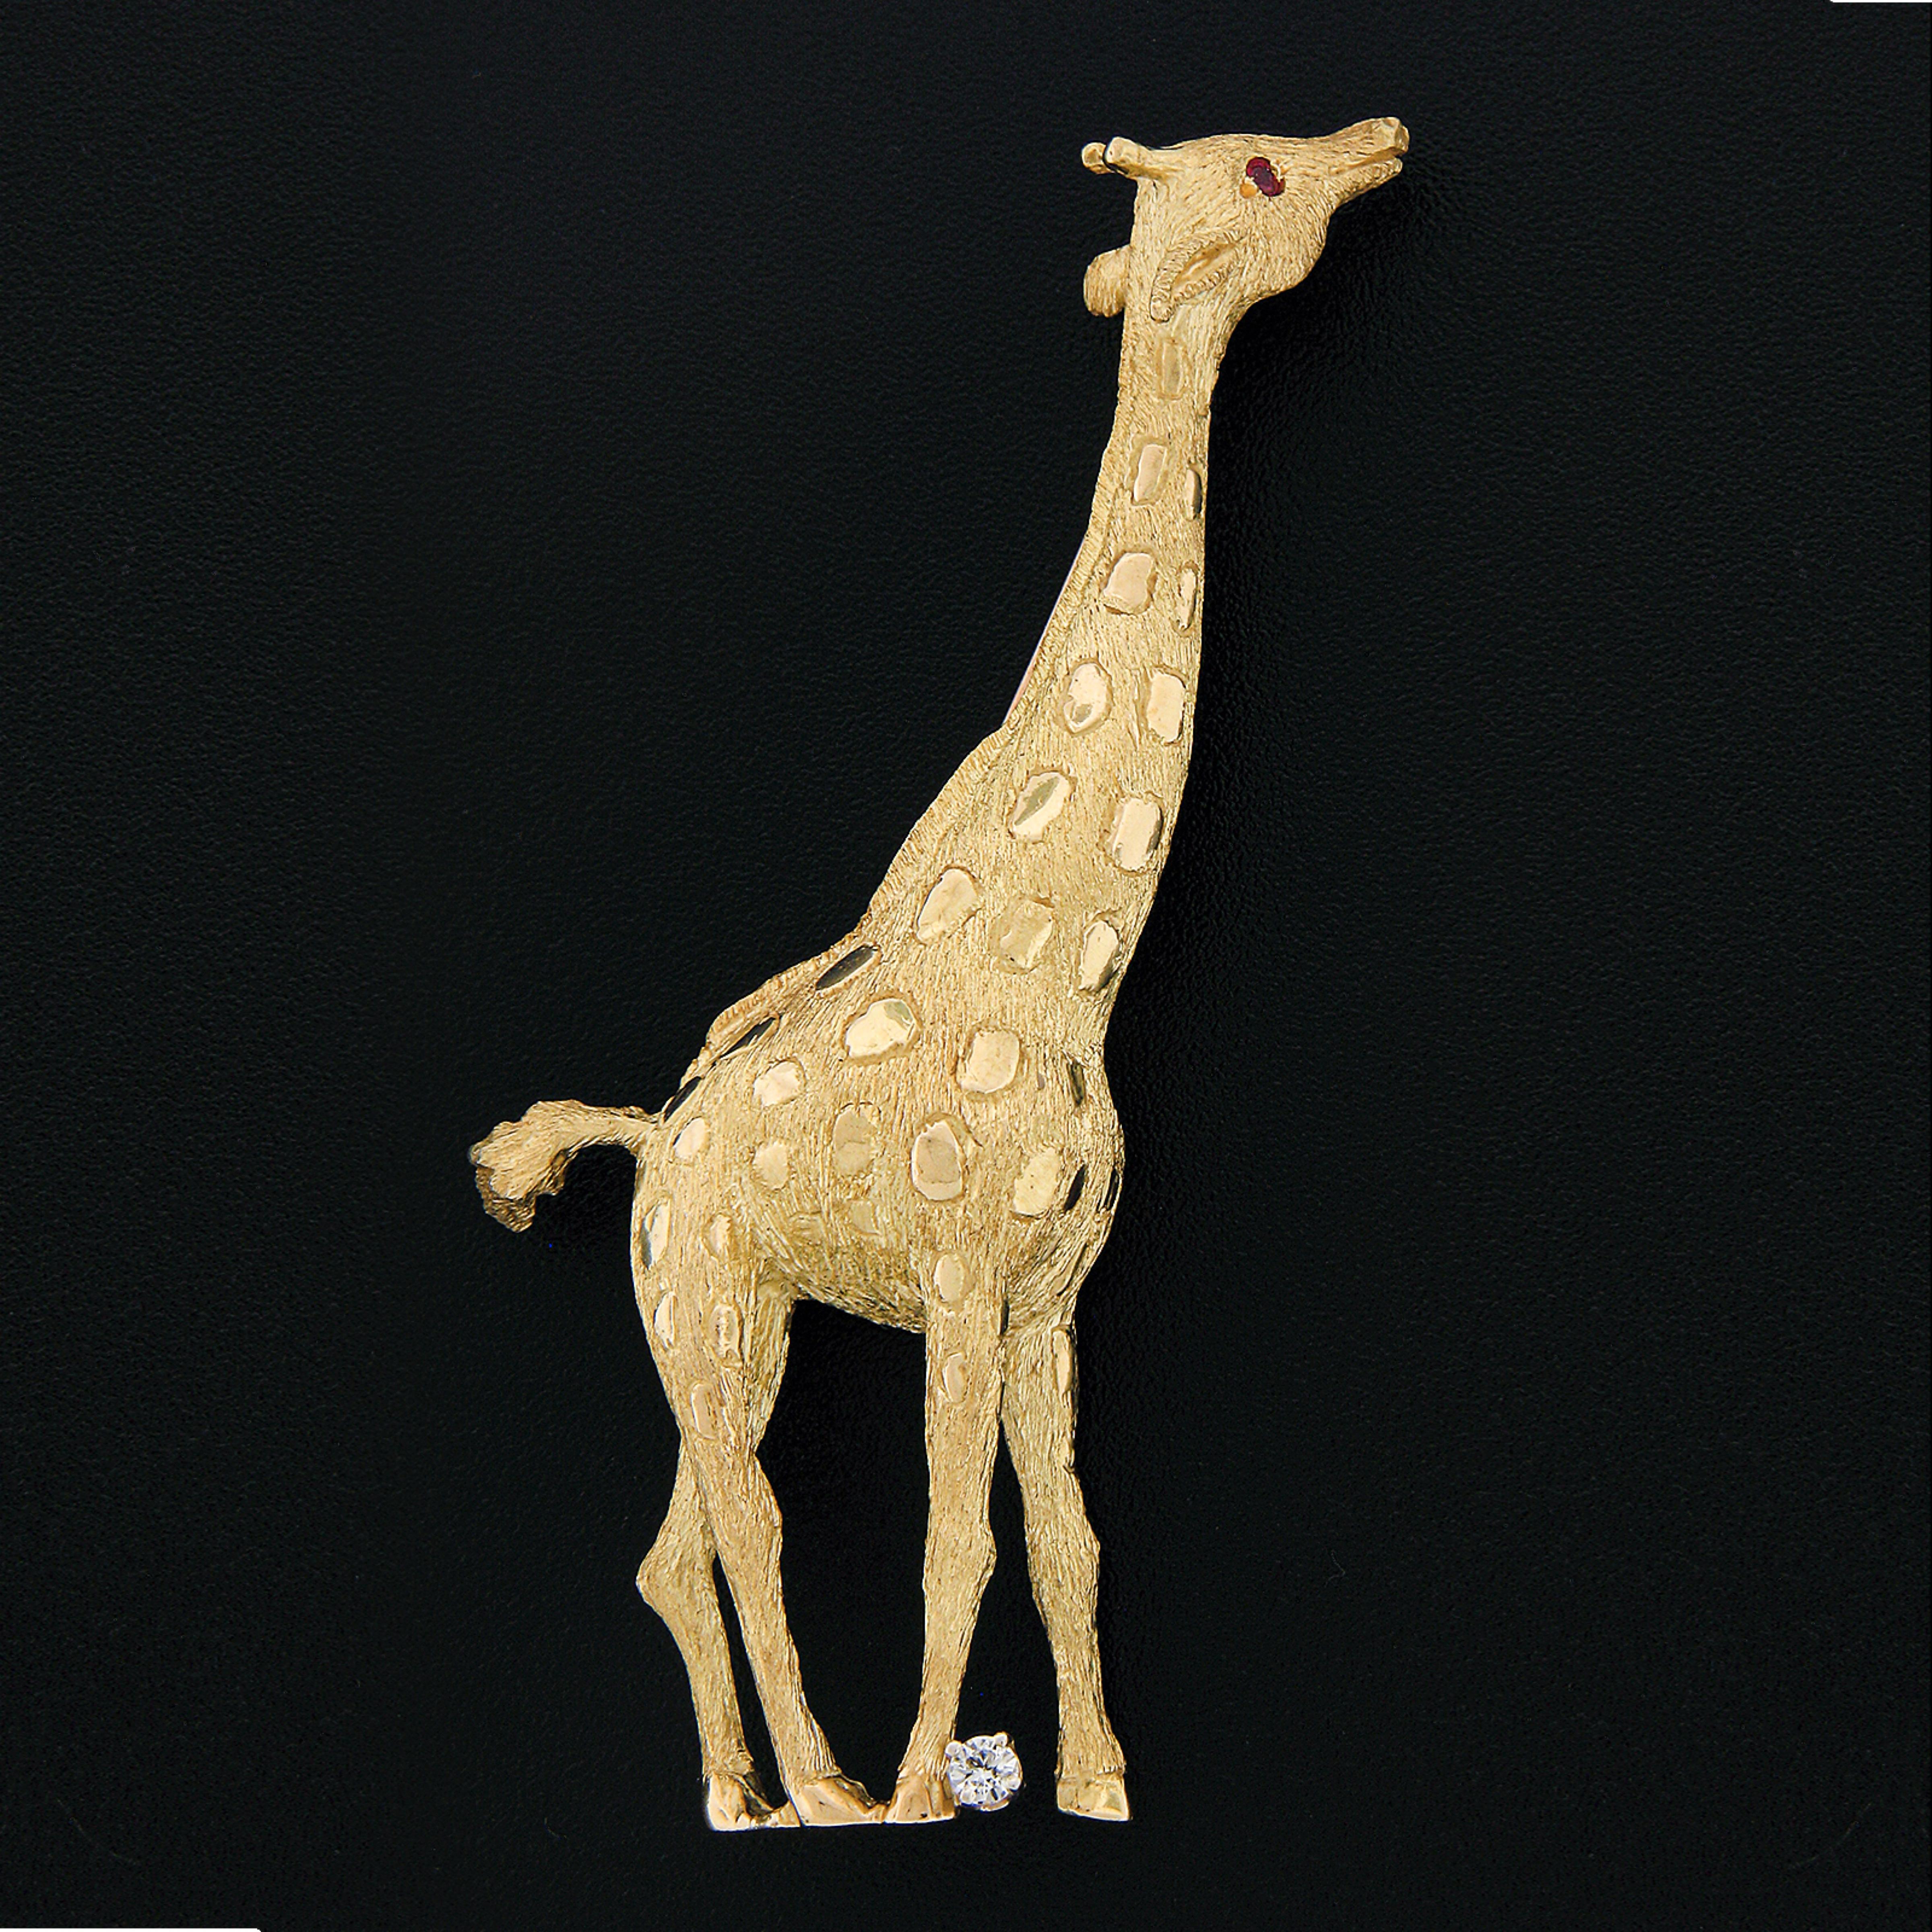 This incredible and very well made brooch/pin is crafted in solid 18k yellow gold. It features a large and perfectly structured standing giraffe design with remarkably outstanding workmanship and texture that bring out maximum detailing granting a